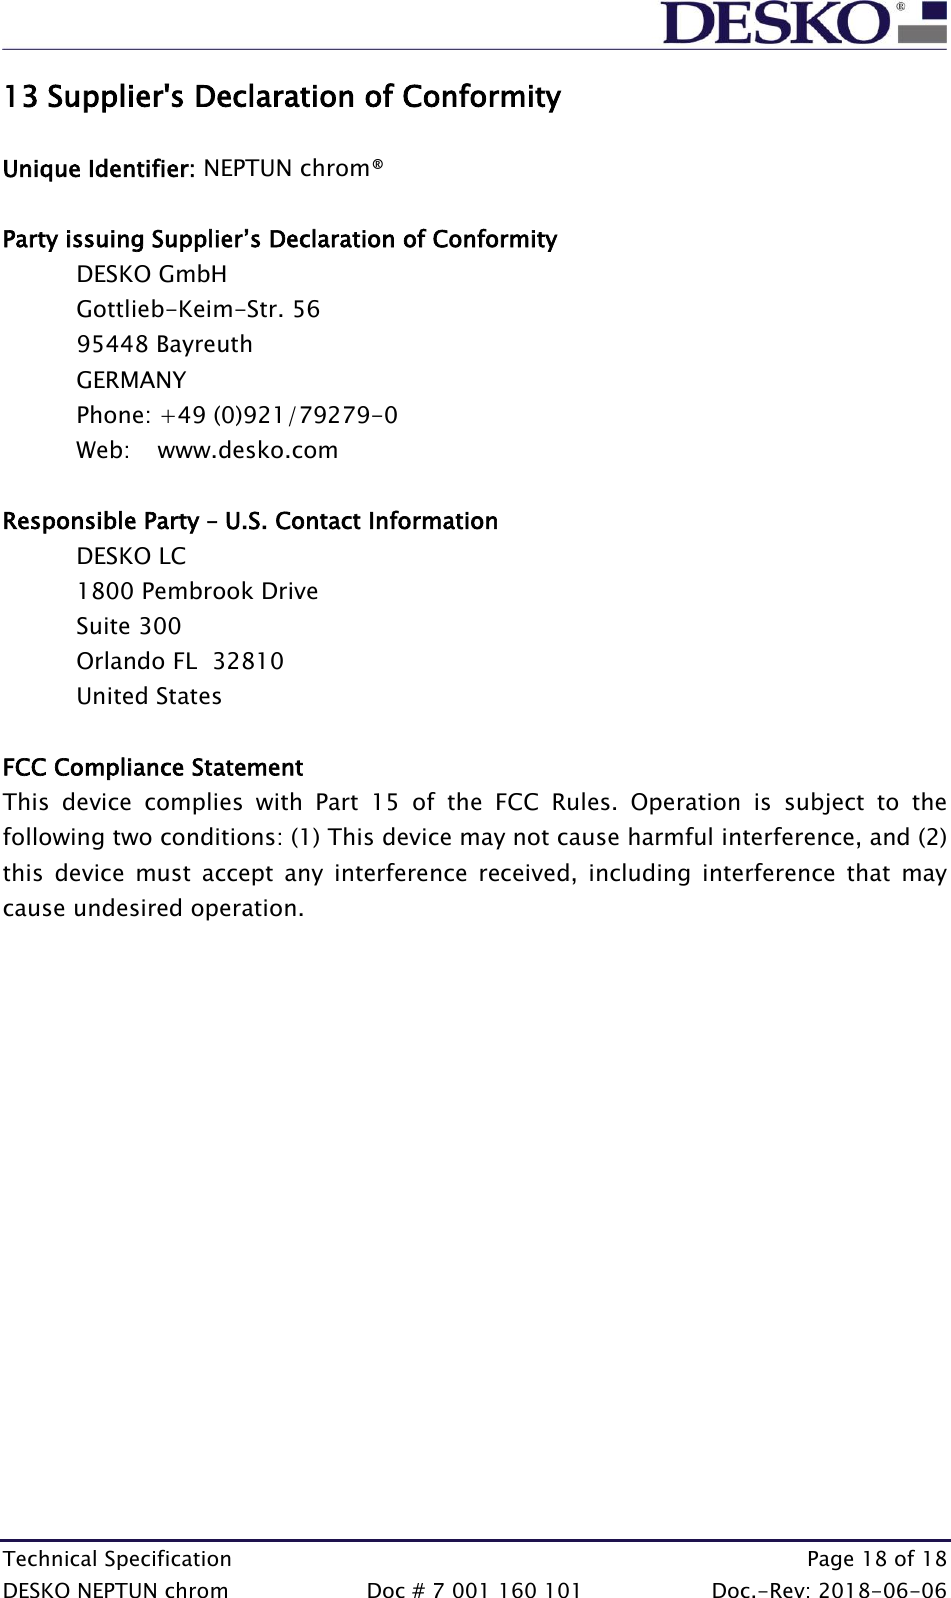  Technical Specification    Page 18 of 18 DESKO NEPTUN chrom  Doc # 7 001 160 101  Doc.-Rev: 2018-06-06 13 Supplier&apos;s Declaration of Conformity  Unique Identifier: NEPTUN chrom®  Party issuing Supplier’s Declaration of Conformity  DESKO GmbH Gottlieb-Keim-Str. 56 95448 Bayreuth GERMANY Phone: +49 (0)921/79279-0 Web:   www.desko.com   Responsible Party – U.S. Contact Information  DESKO LC 1800 Pembrook Drive Suite 300 Orlando FL  32810 United States  FCC Compliance Statement  This  device  complies  with  Part  15  of  the  FCC  Rules.  Operation  is  subject  to  the following two conditions: (1) This device may not cause harmful interference, and (2) this  device  must  accept  any  interference  received,  including  interference  that  may cause undesired operation.    